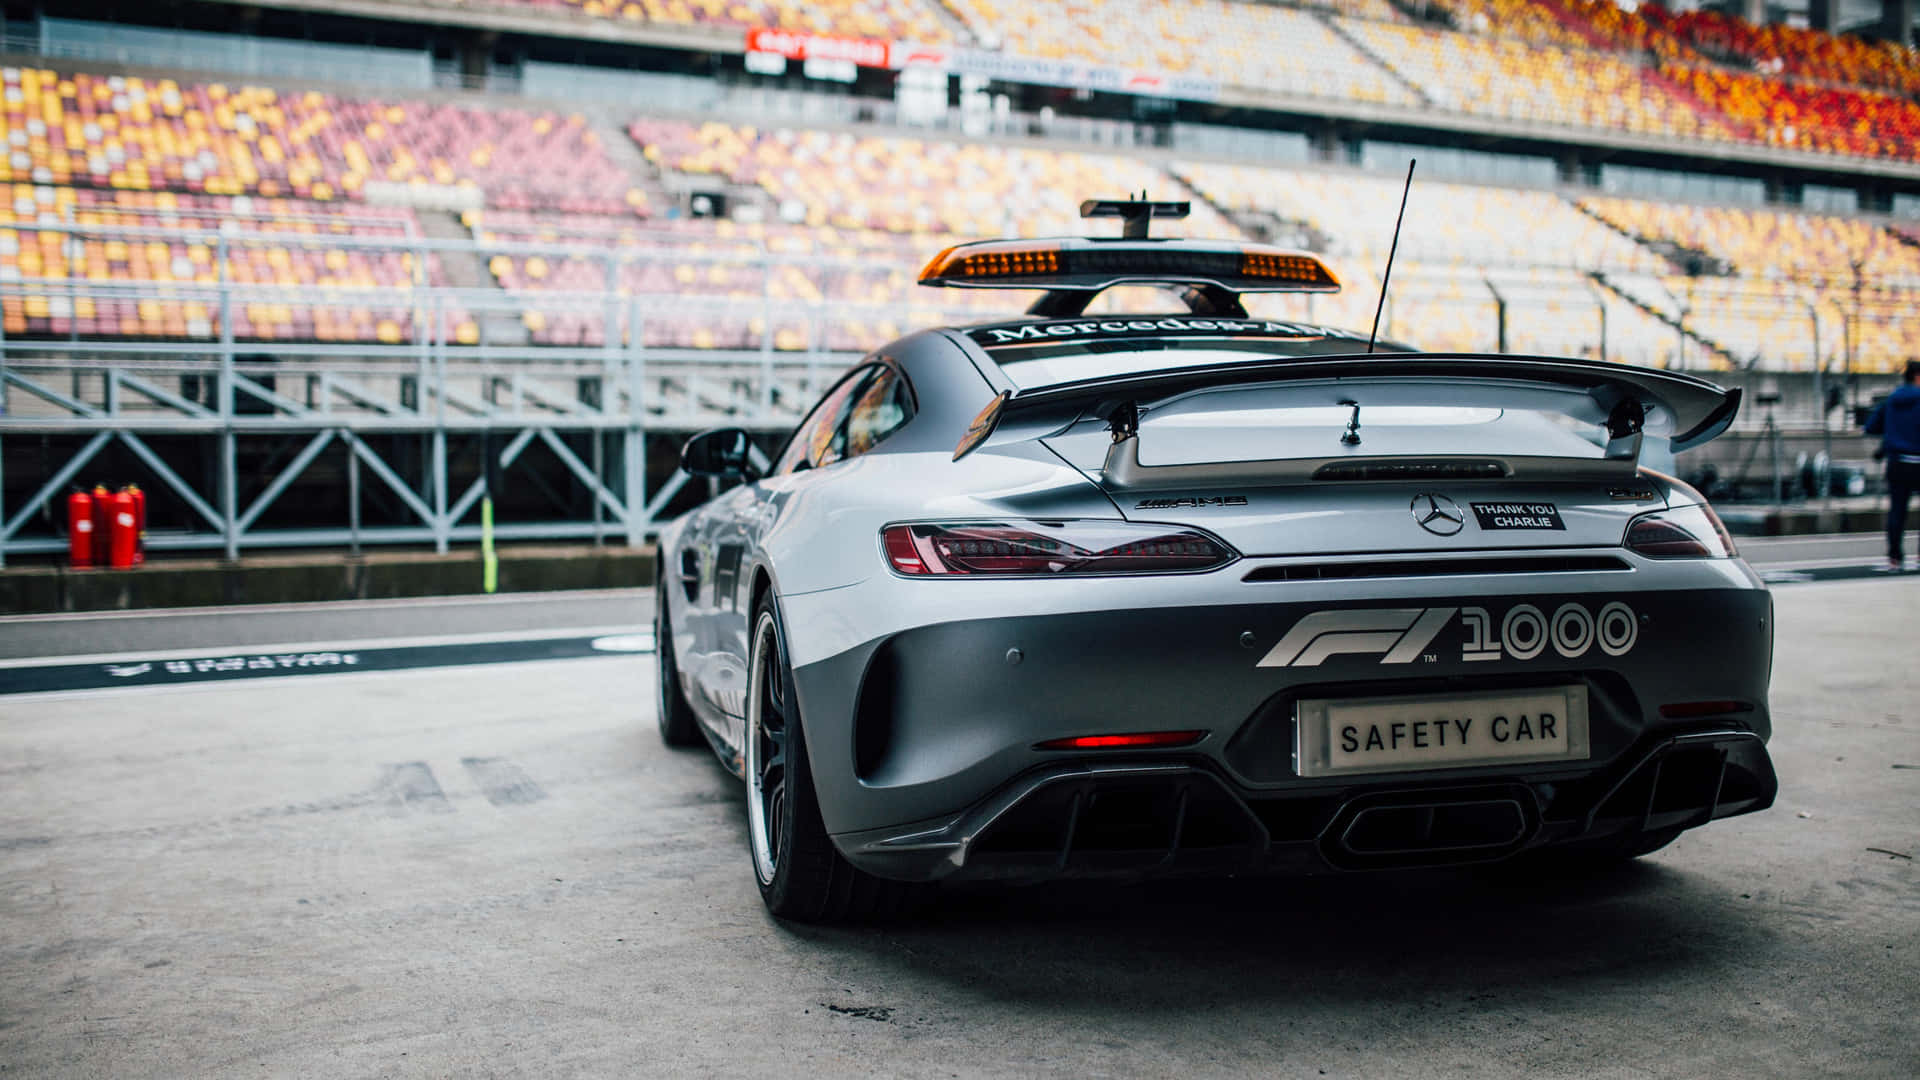 A sleek safety car leading the race on a high-speed track Wallpaper